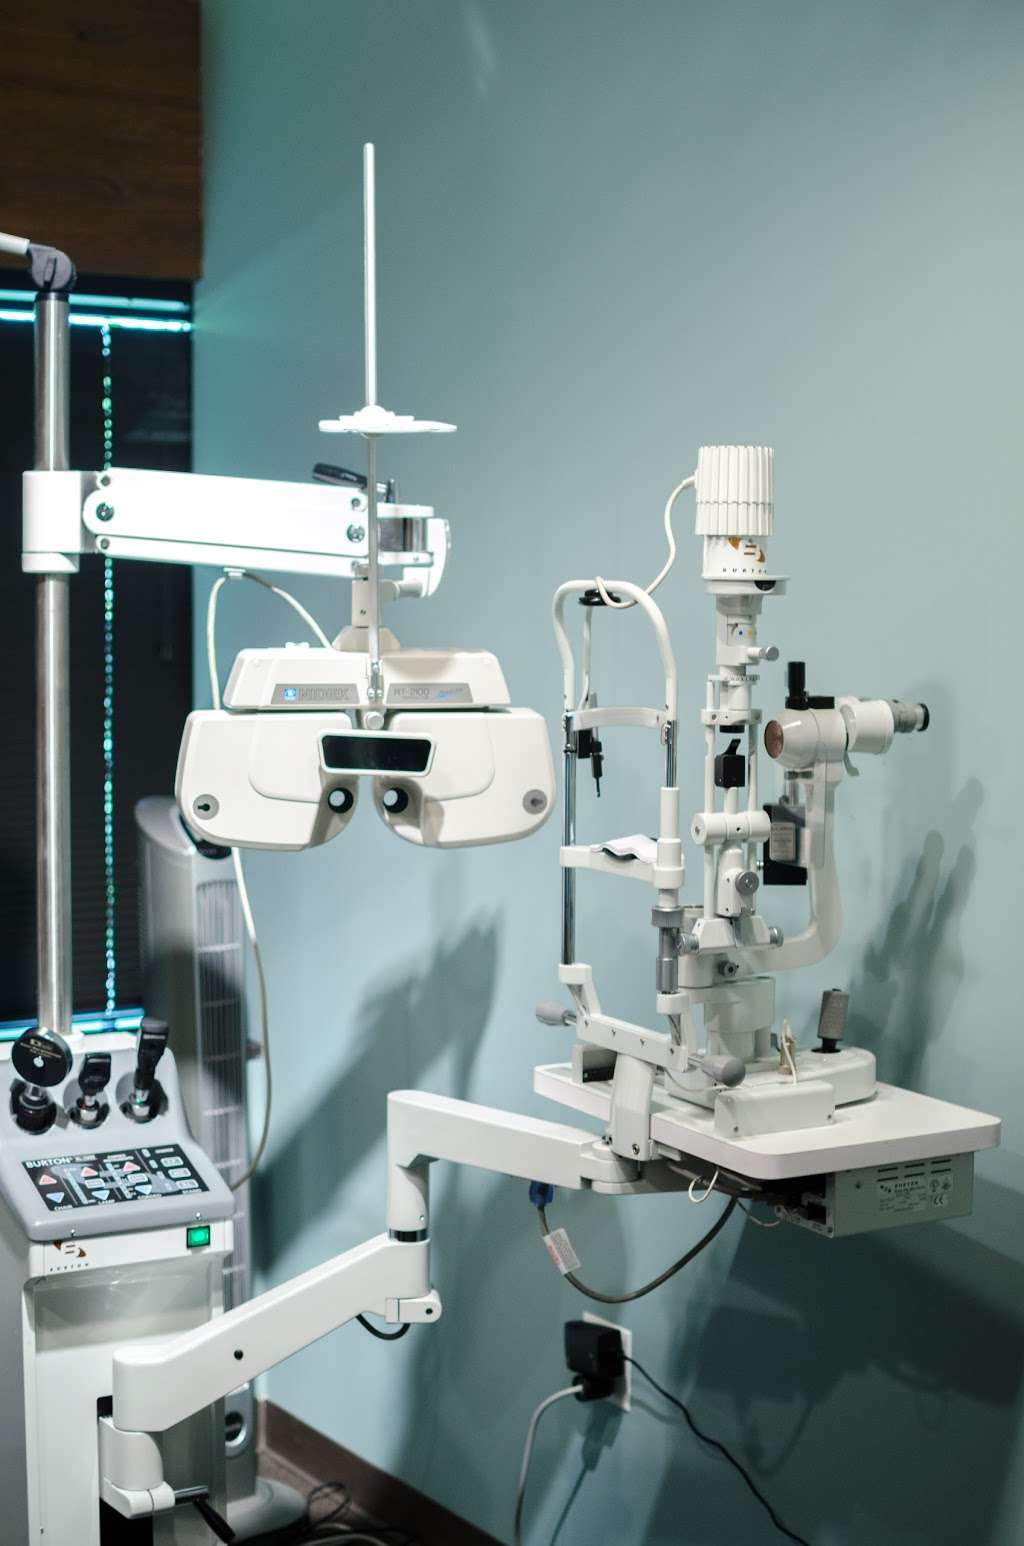 Coventry Eyecare Associates Ltd | 500 Coventry Ln #200, Crystal Lake, IL 60014 | Phone: (815) 459-5433